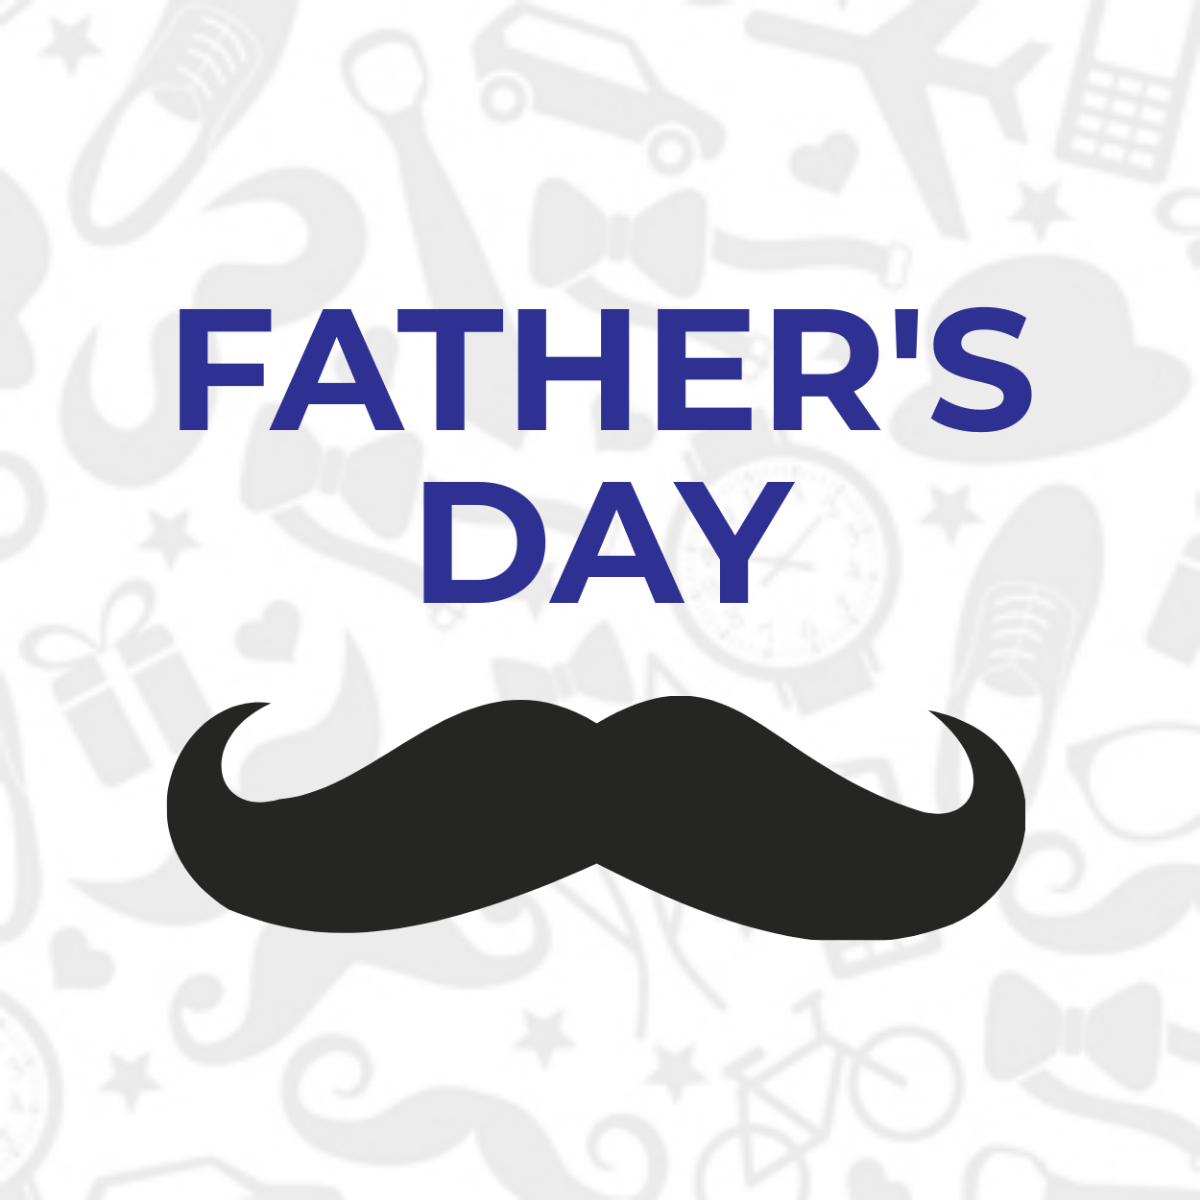 Father's Day Google Plus Header Photo Template